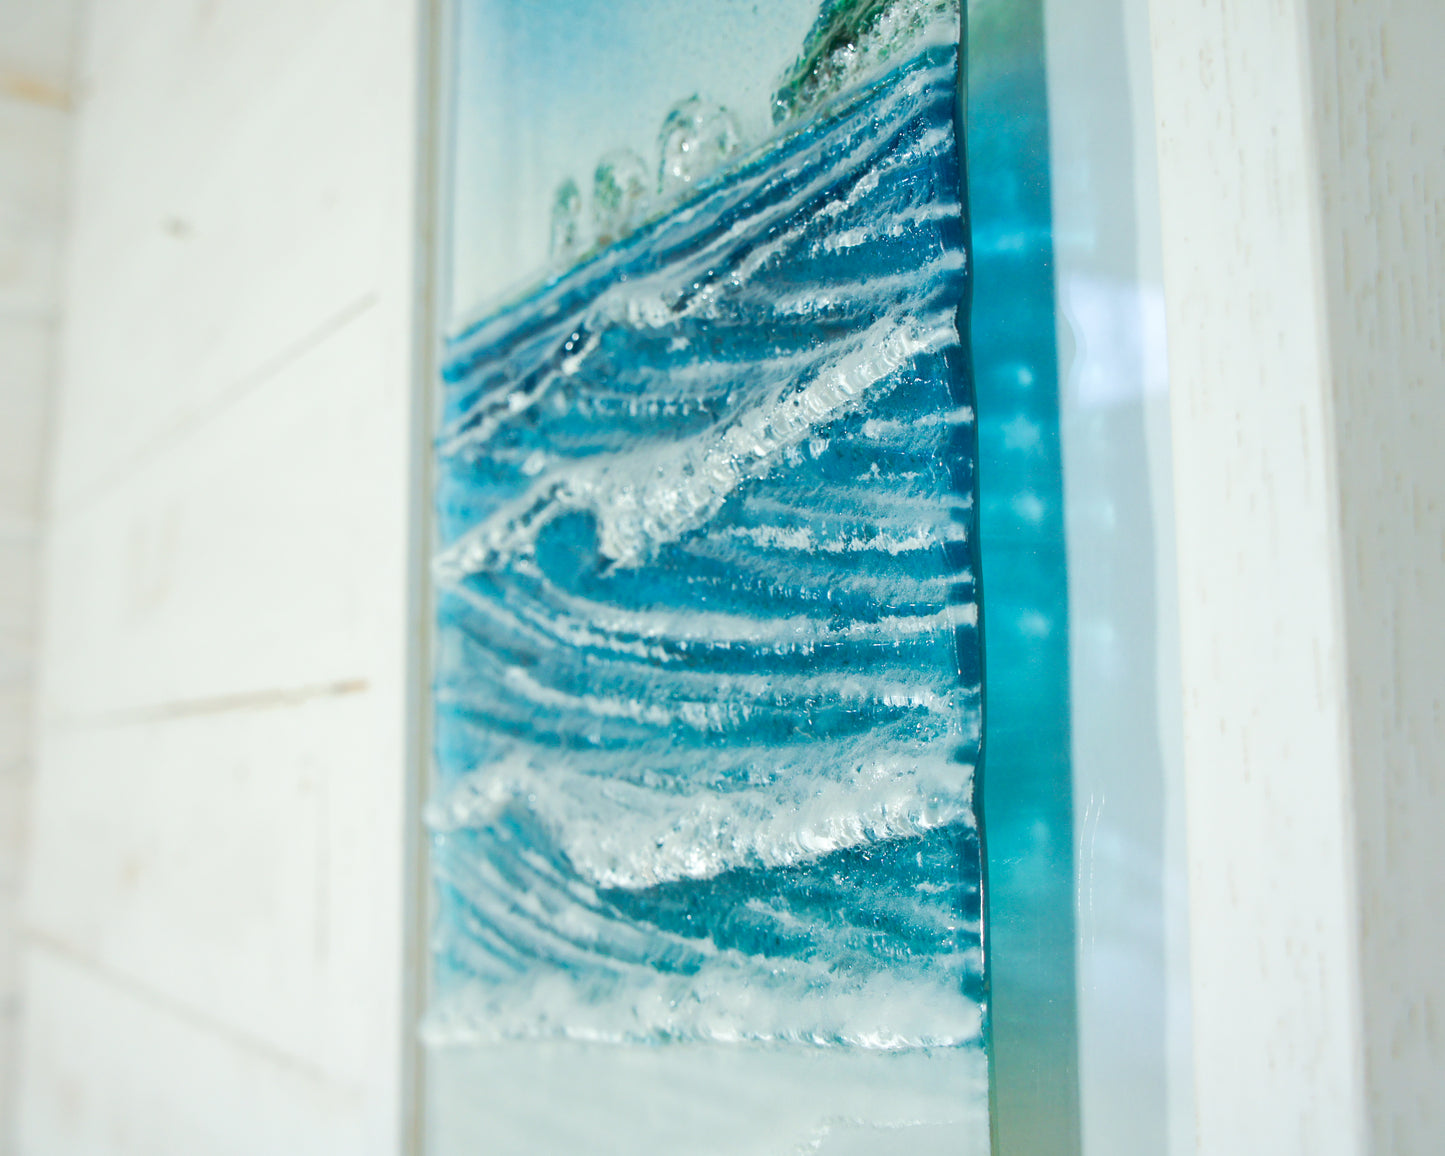 Triptych of Lighthouse Wave Frames - 2 at 25cmx45cm(10x17") + 1 at 45x45cm(17x17") | 3 Wave Large Sea Beach Lighthouse Fused Glass Frames